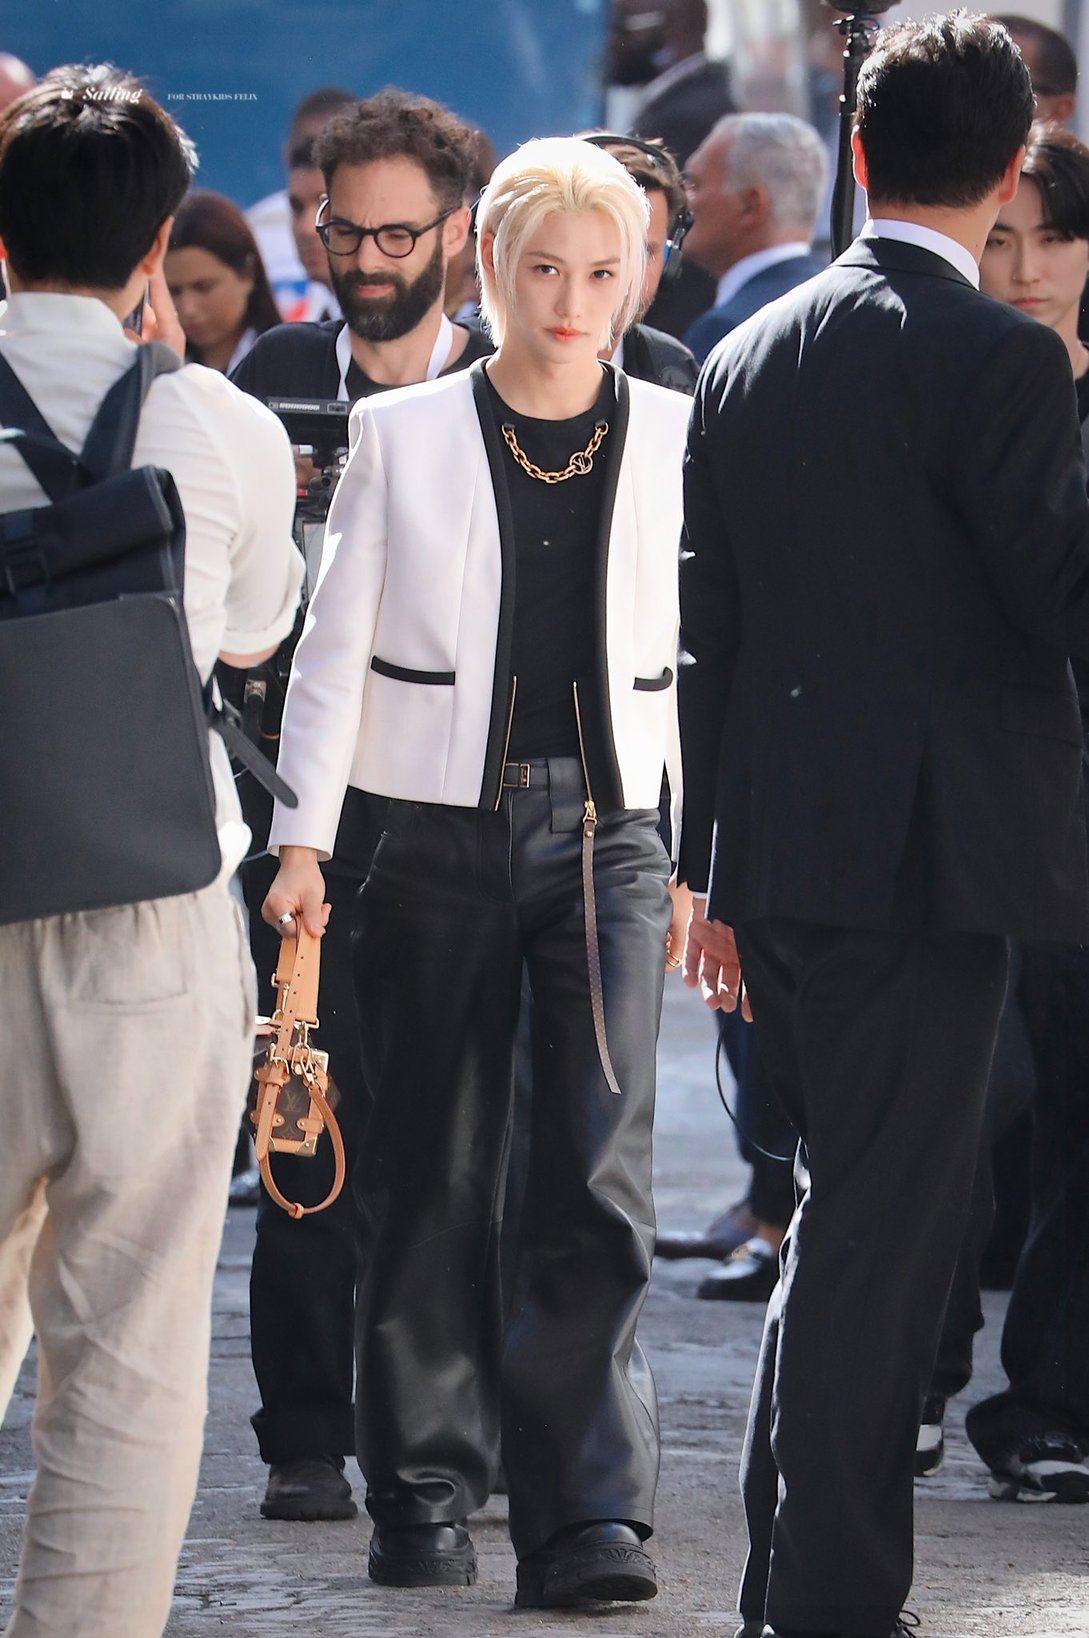 Viral Takes on X: Felix of Stray Kids attends the Louis Vuitton